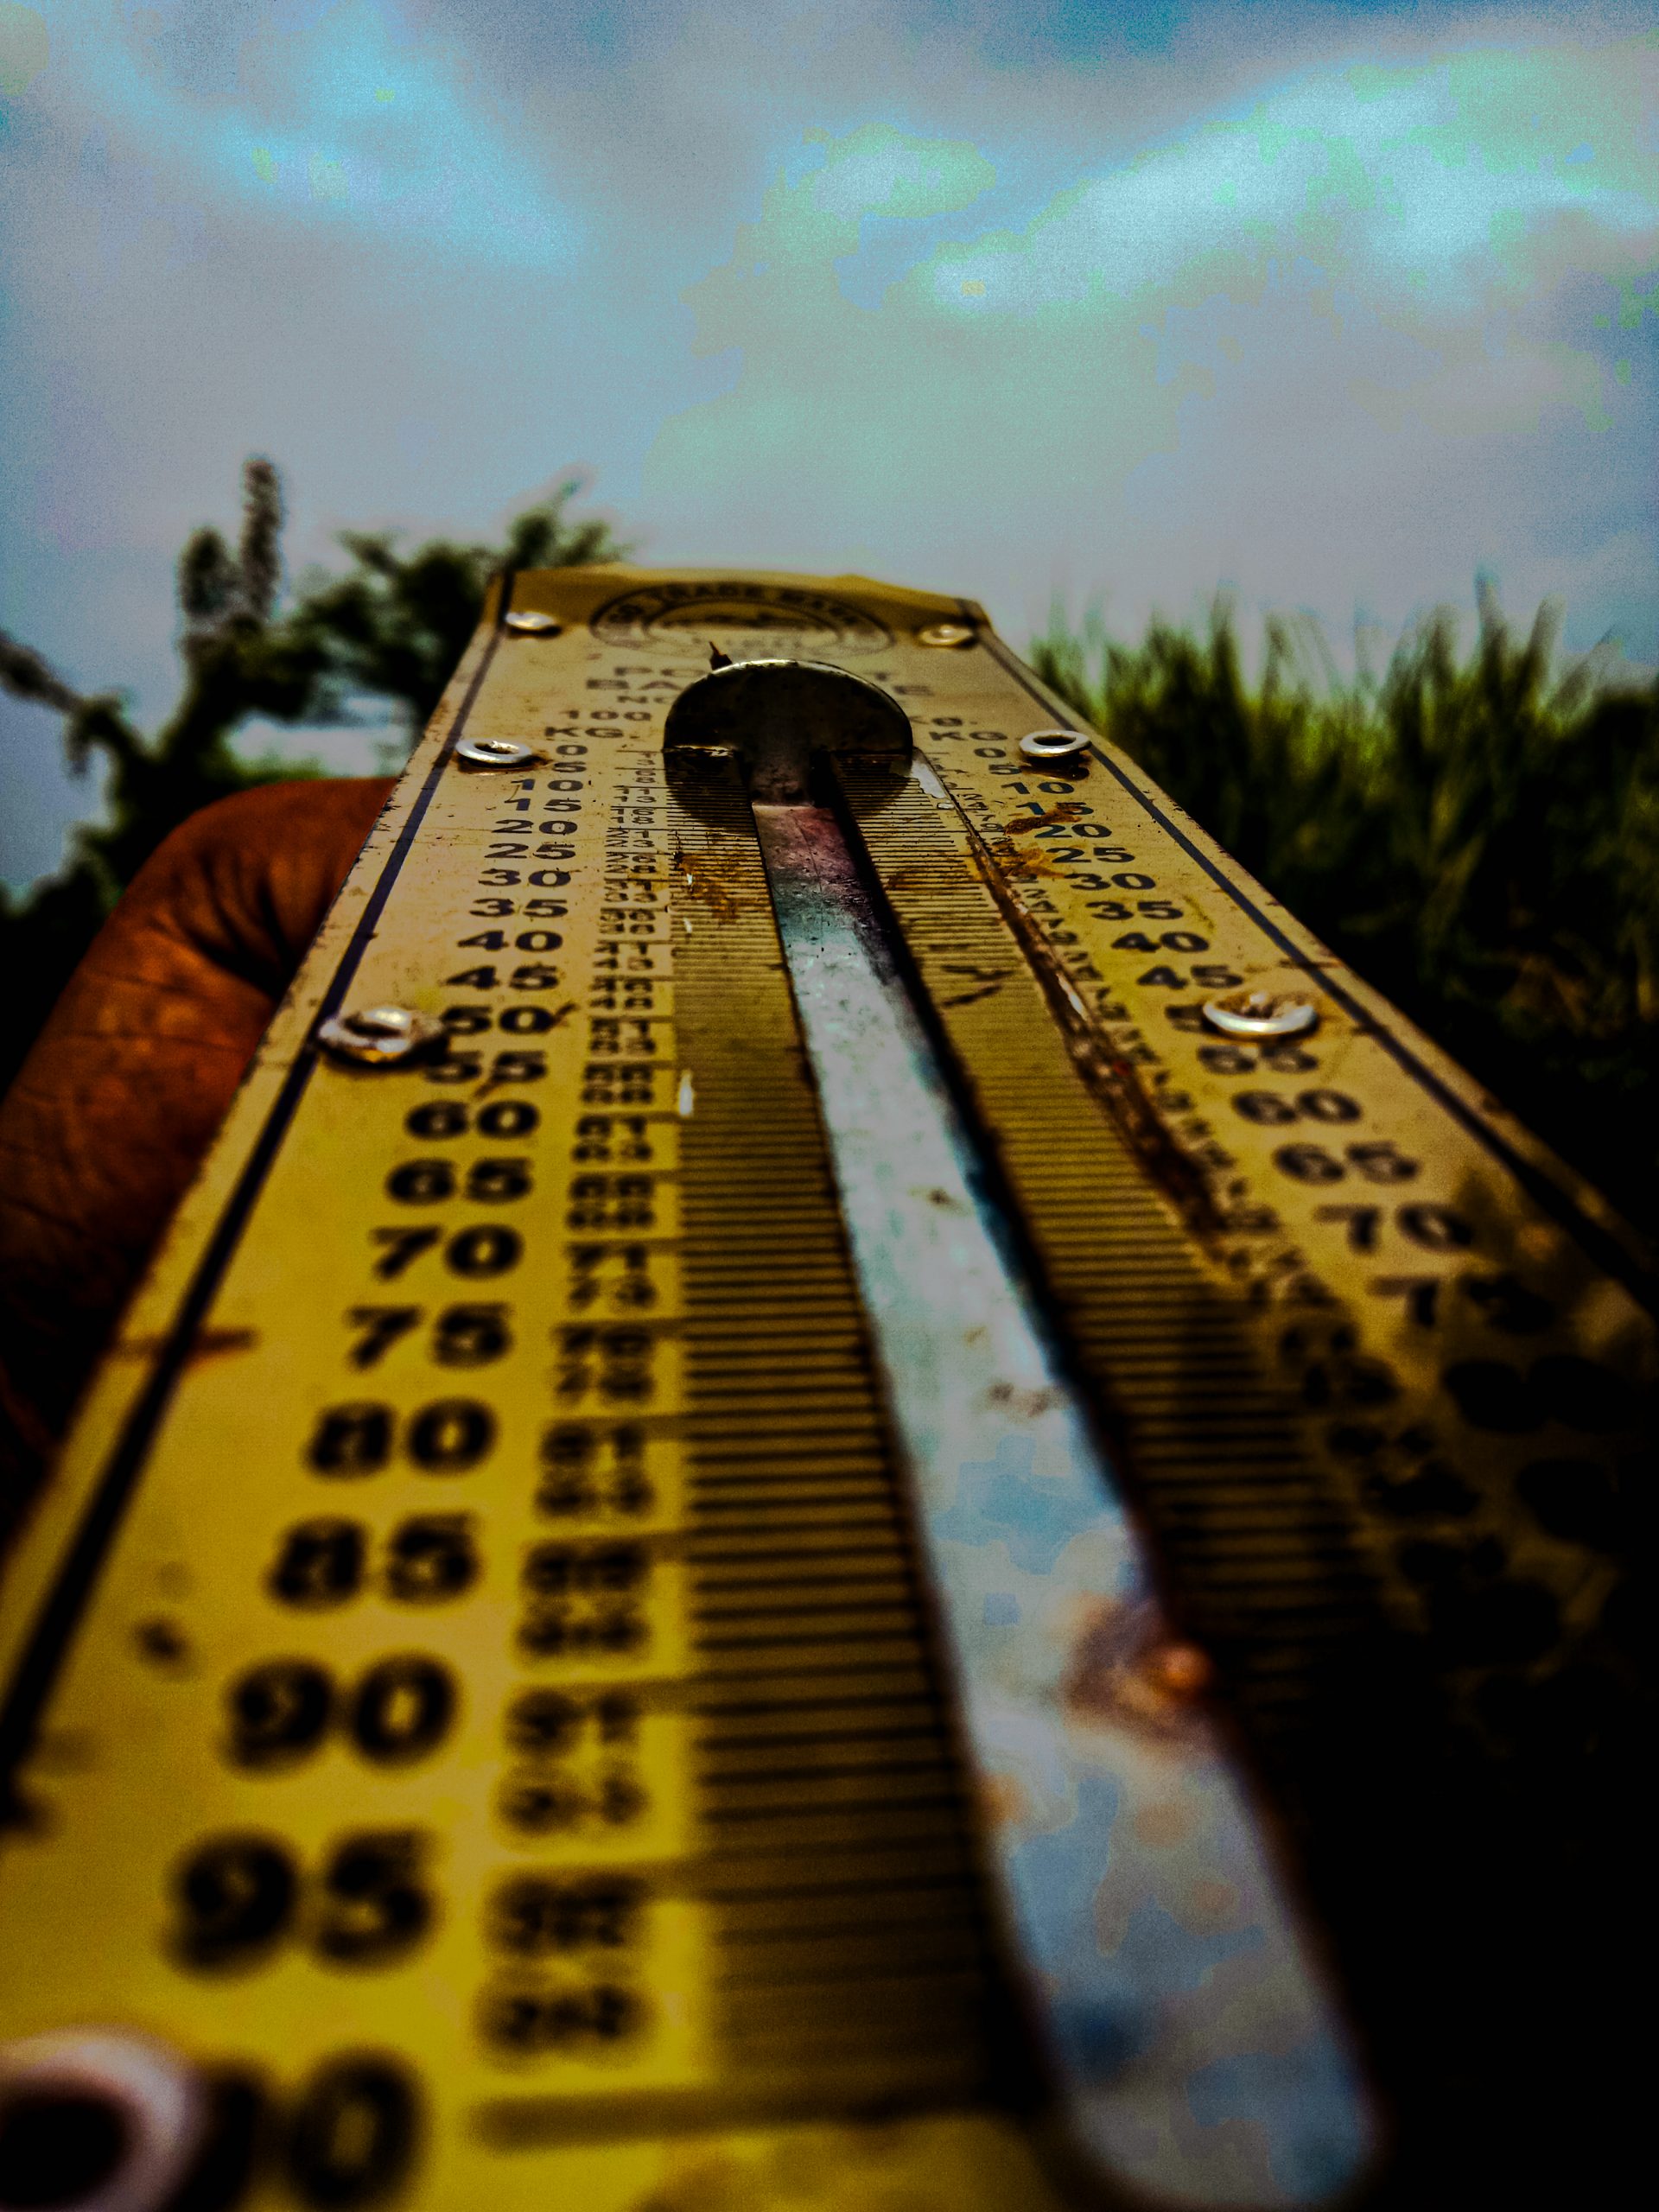 Number marking on a weighing meter